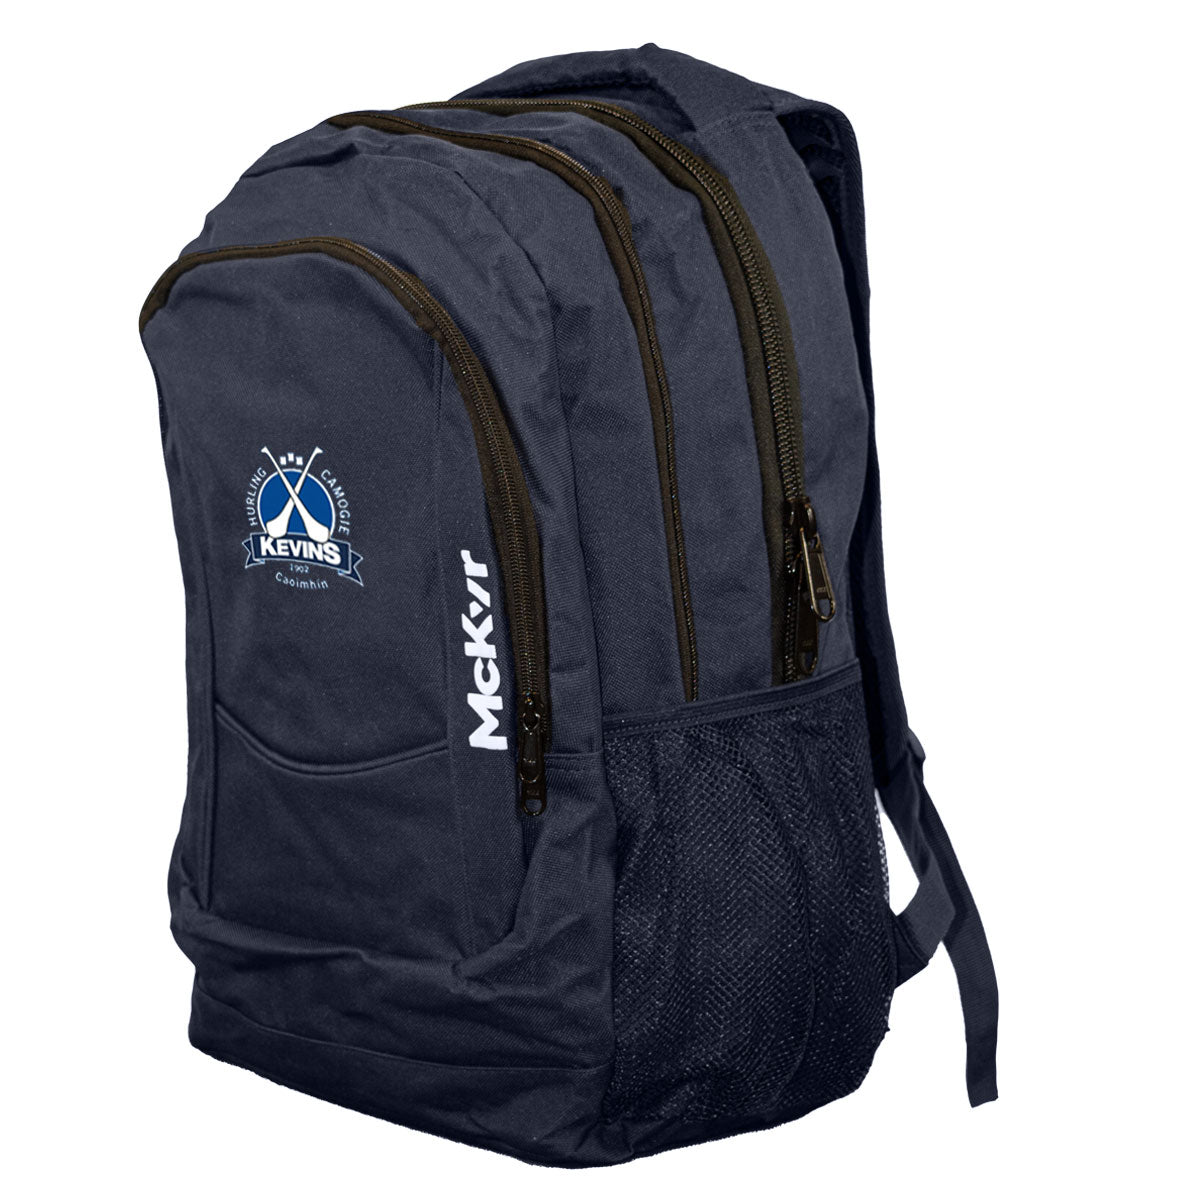 Mc Keever Kevins Hurling & Camogie Dublin Core 22 Back Pack - Navy